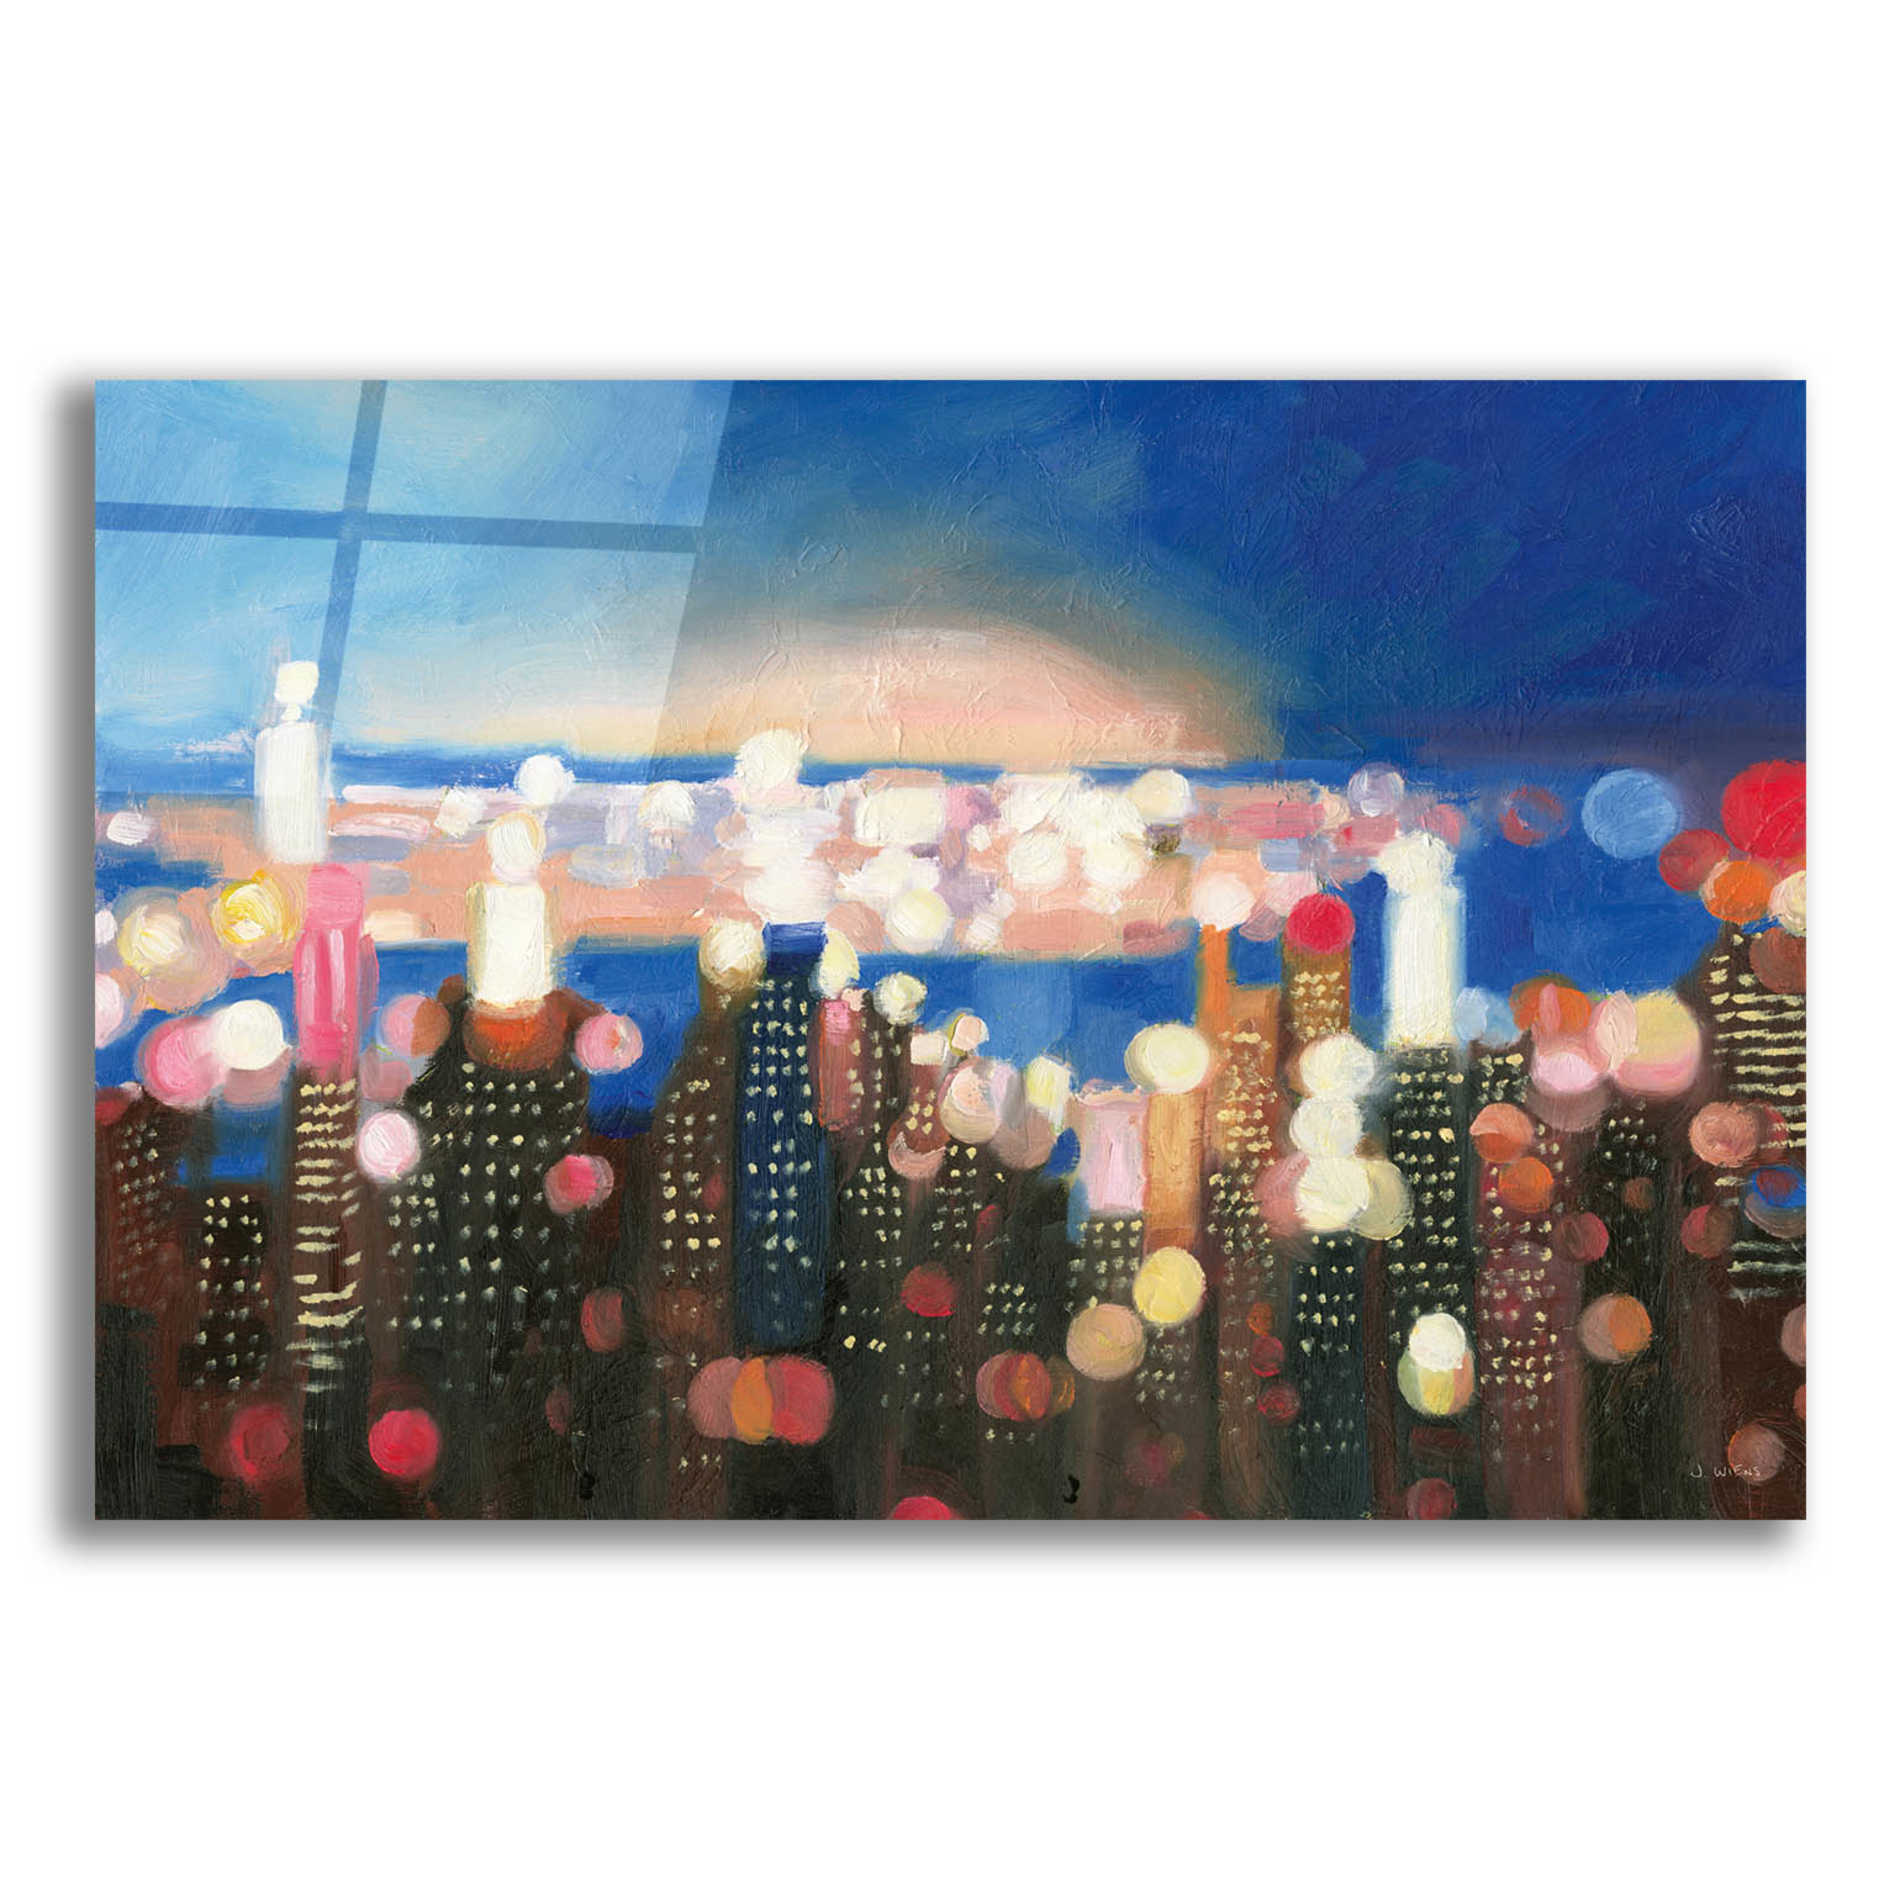 Epic Art 'City Lights' by James Wiens, Acrylic Glass Wall Art,18x12x1.1x0,26x18x1.1x0,40x26x1.74x0,60x40x1.74x0